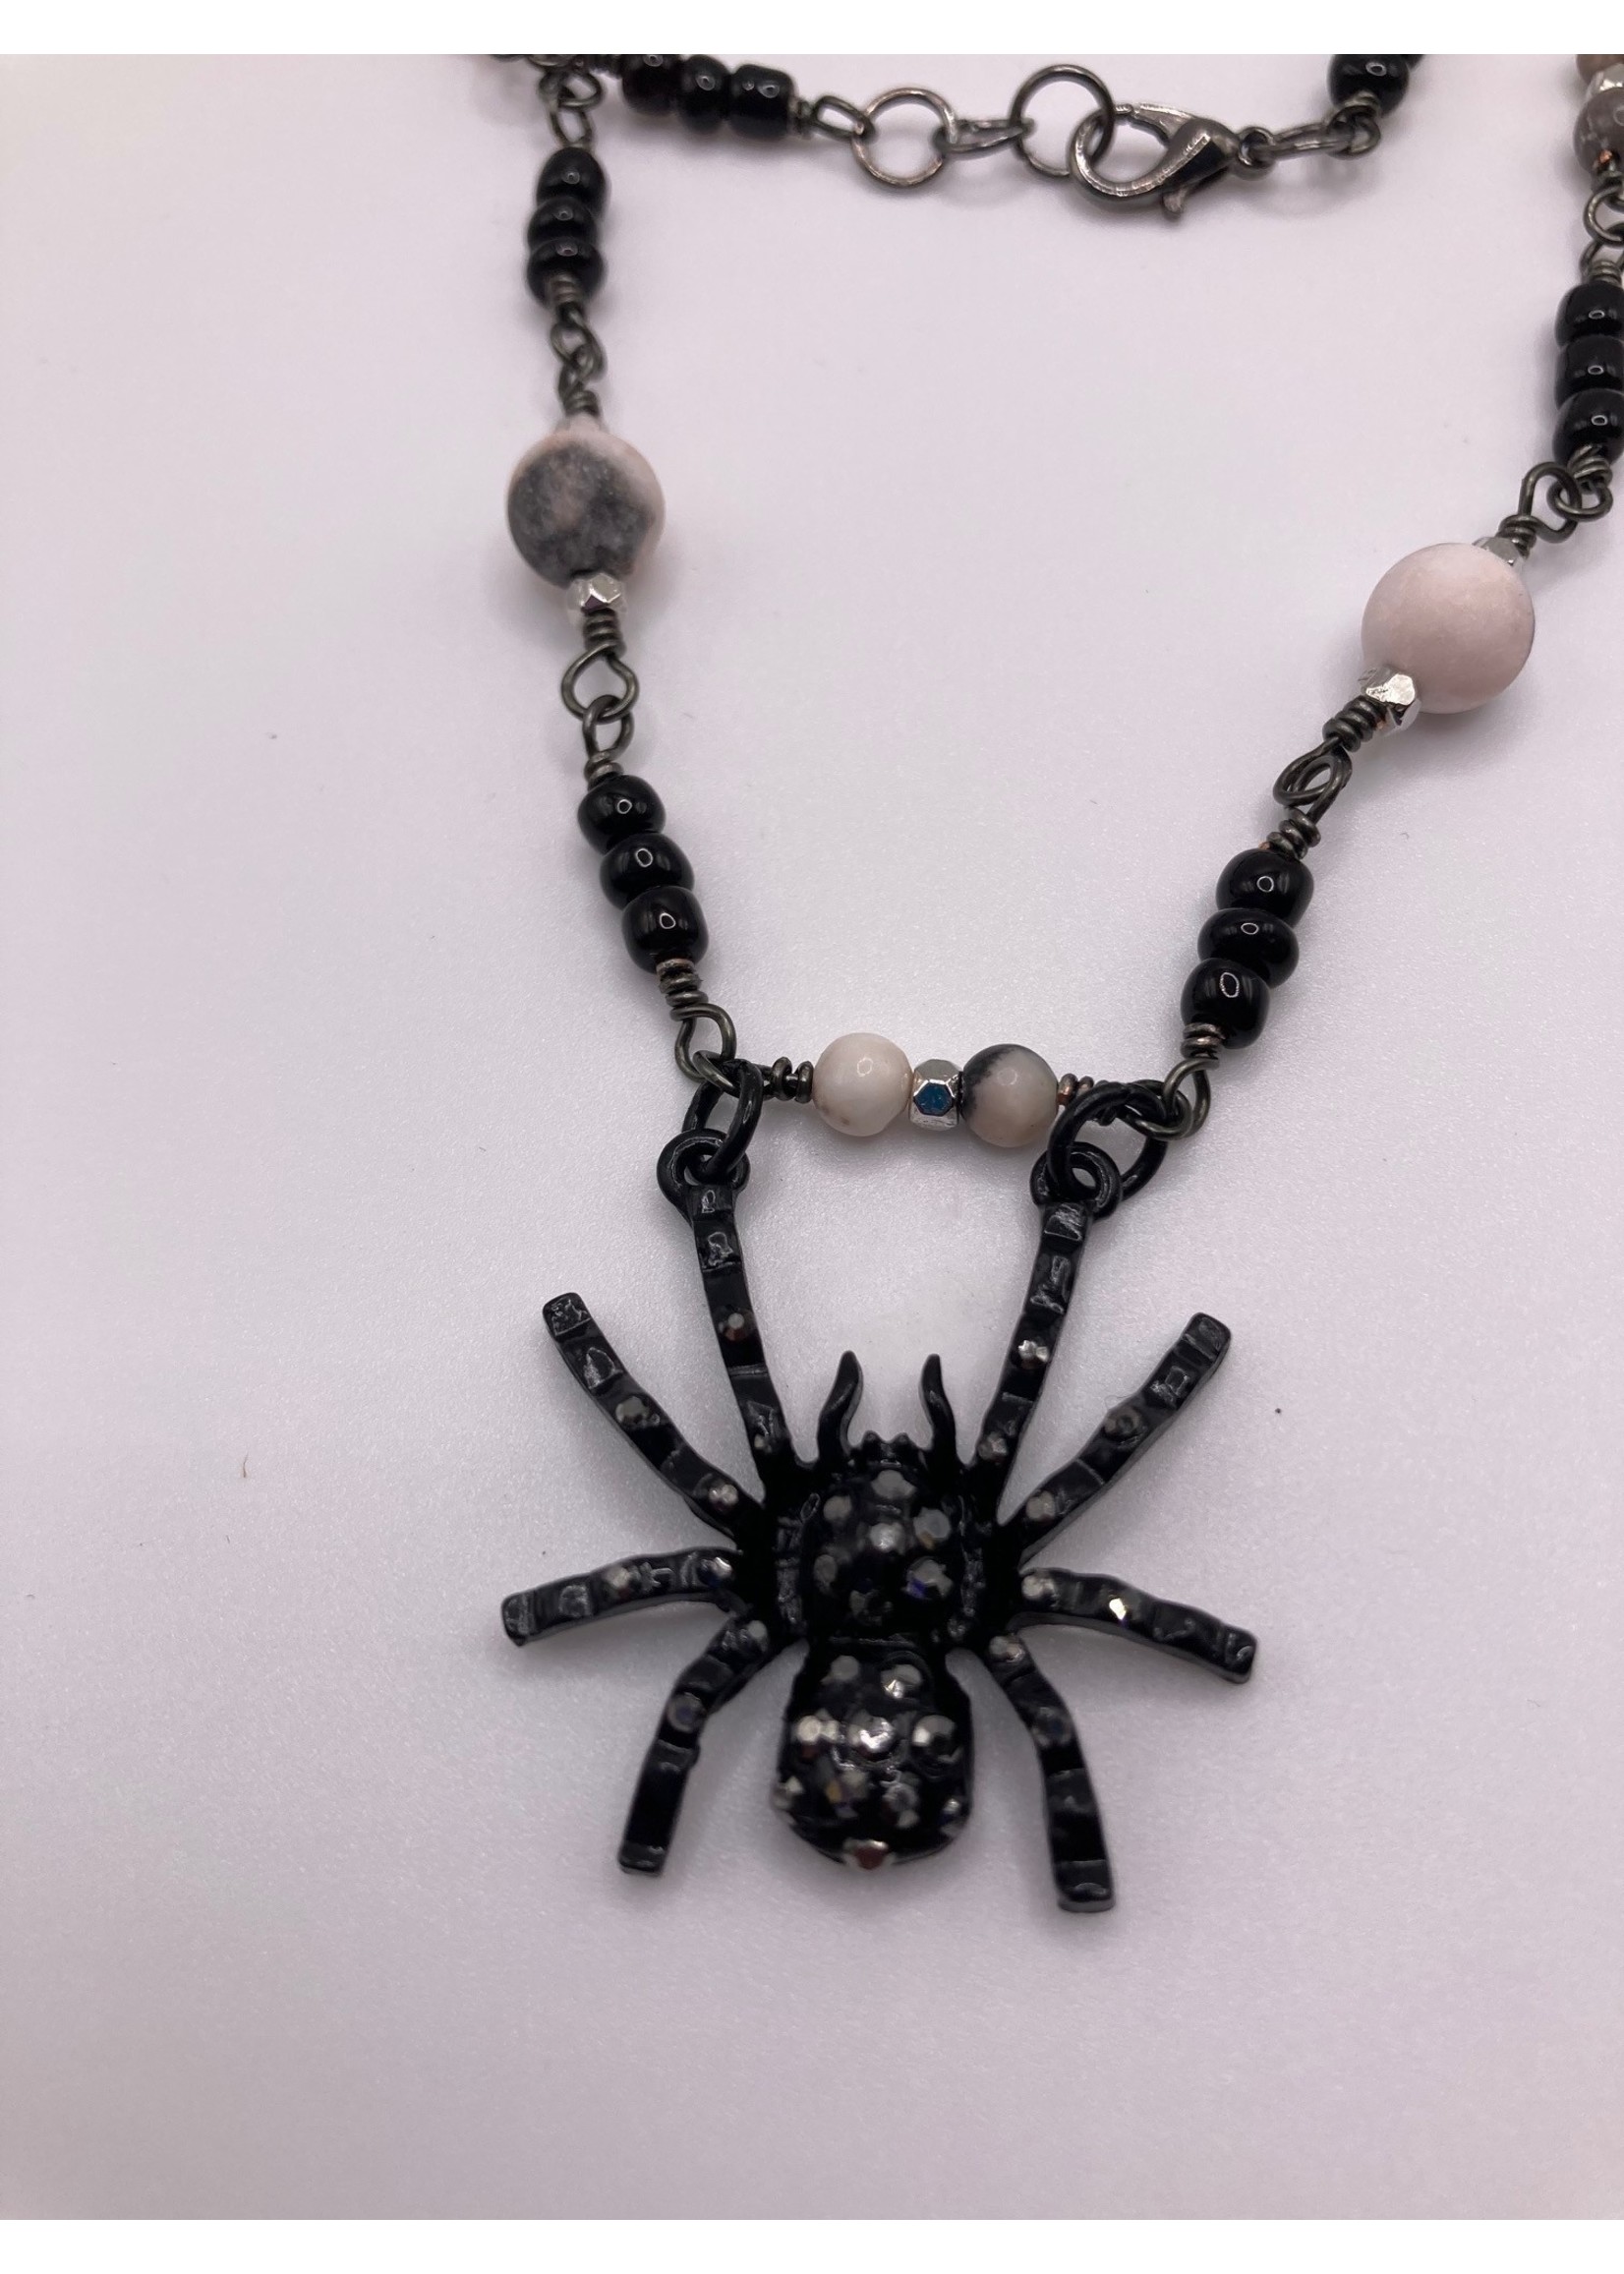 Our Twisted Dahlia Pink Zebra Jasper, Black Seed Beads, and Black Spider with Rhinestone Necklace